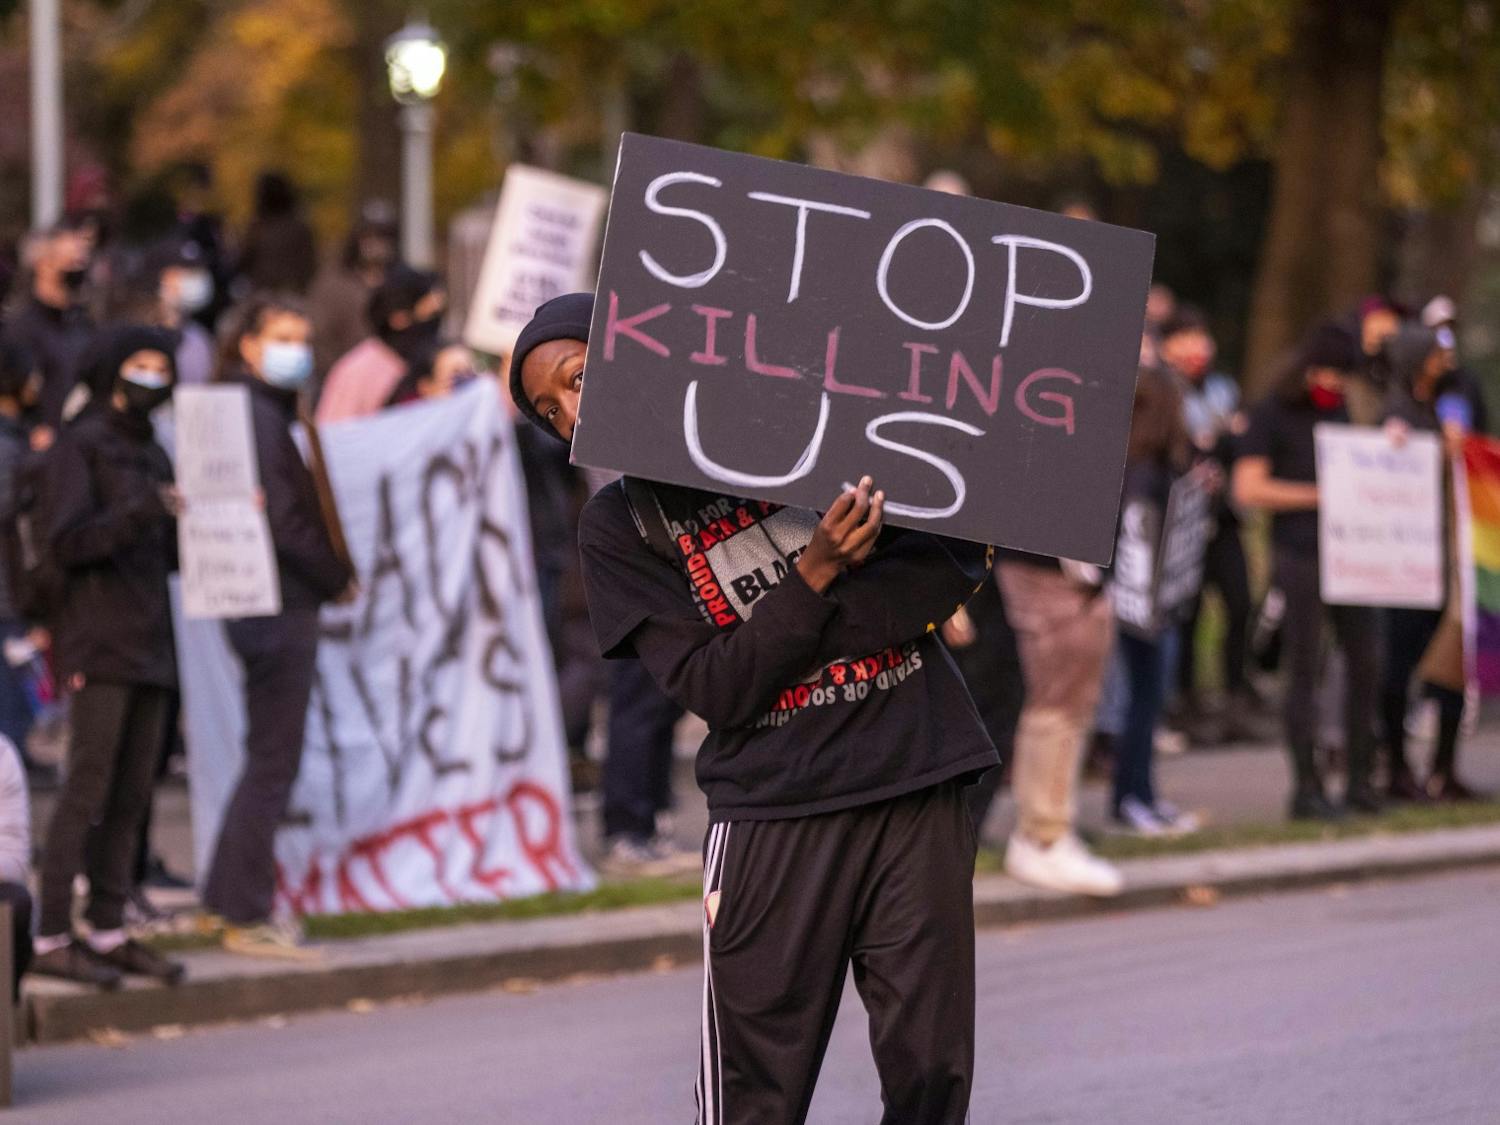 Several dozen demonstrators gathered at the State Capital along E. Morgan Street voicing their opposition to the verdict in the Kyle Rittenhouse case on Saturday, November 20, 201 in Raleigh, N.C. Photo courtesy of Robert Willett/The News & Observer.